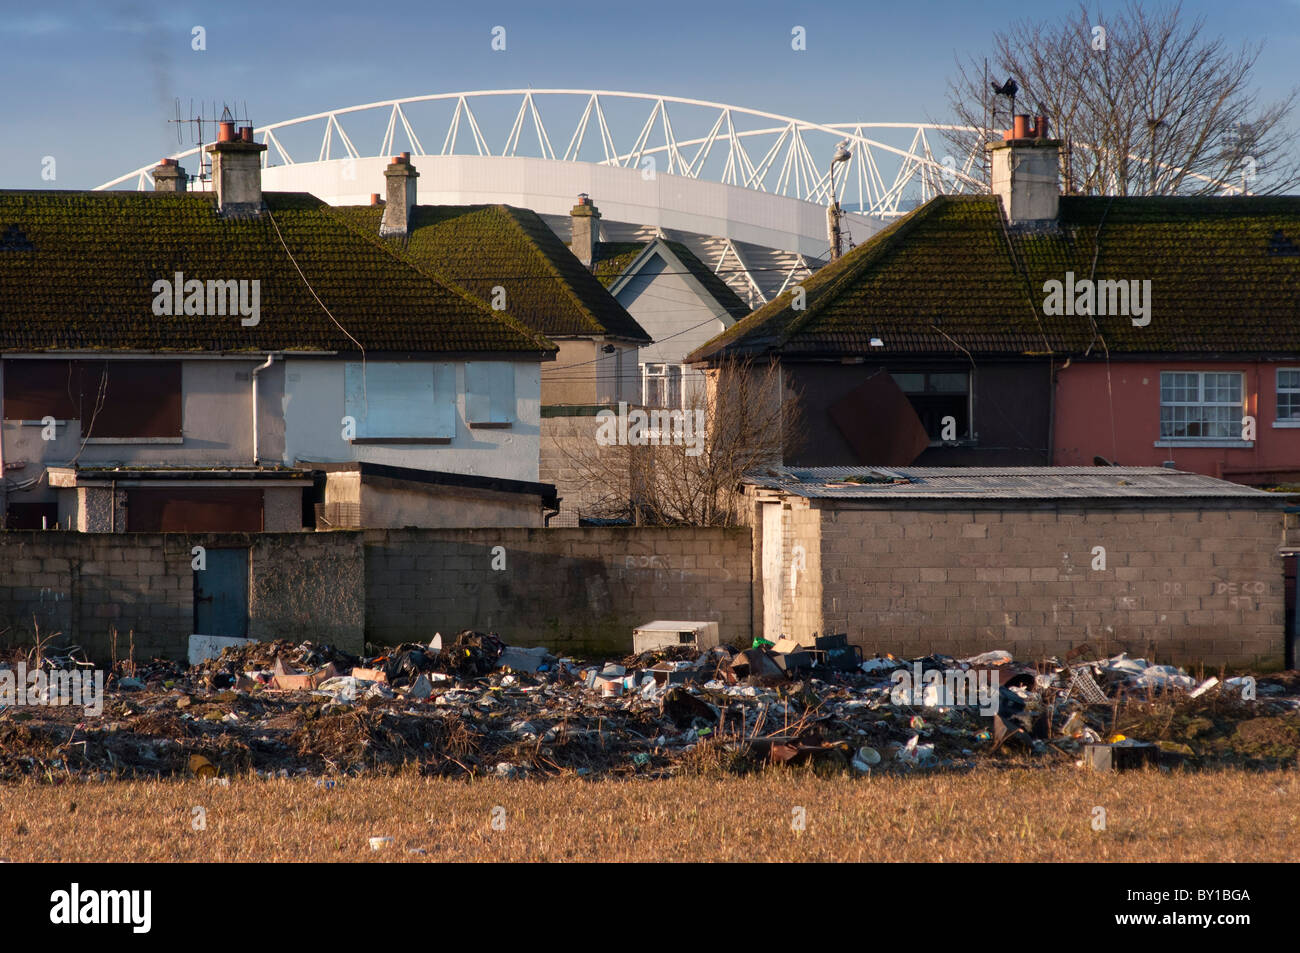 Dilapidated housing with piles of rubbish dumped in Limerick city, Ireland, with the Munster sports stadium in the background. Stock Photo